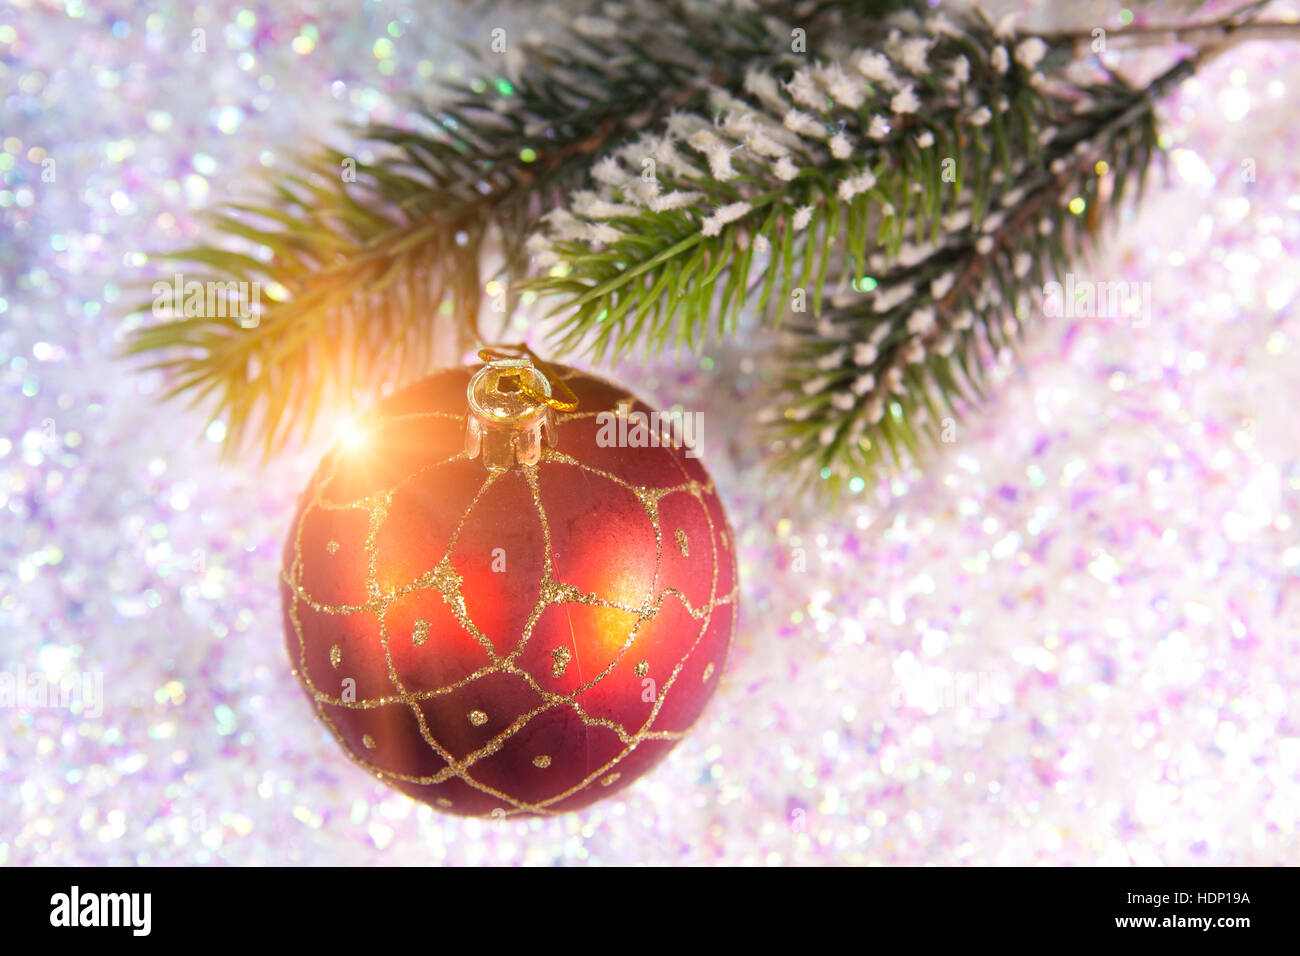 New Year's ball on a background of decorative snow Stock Photo